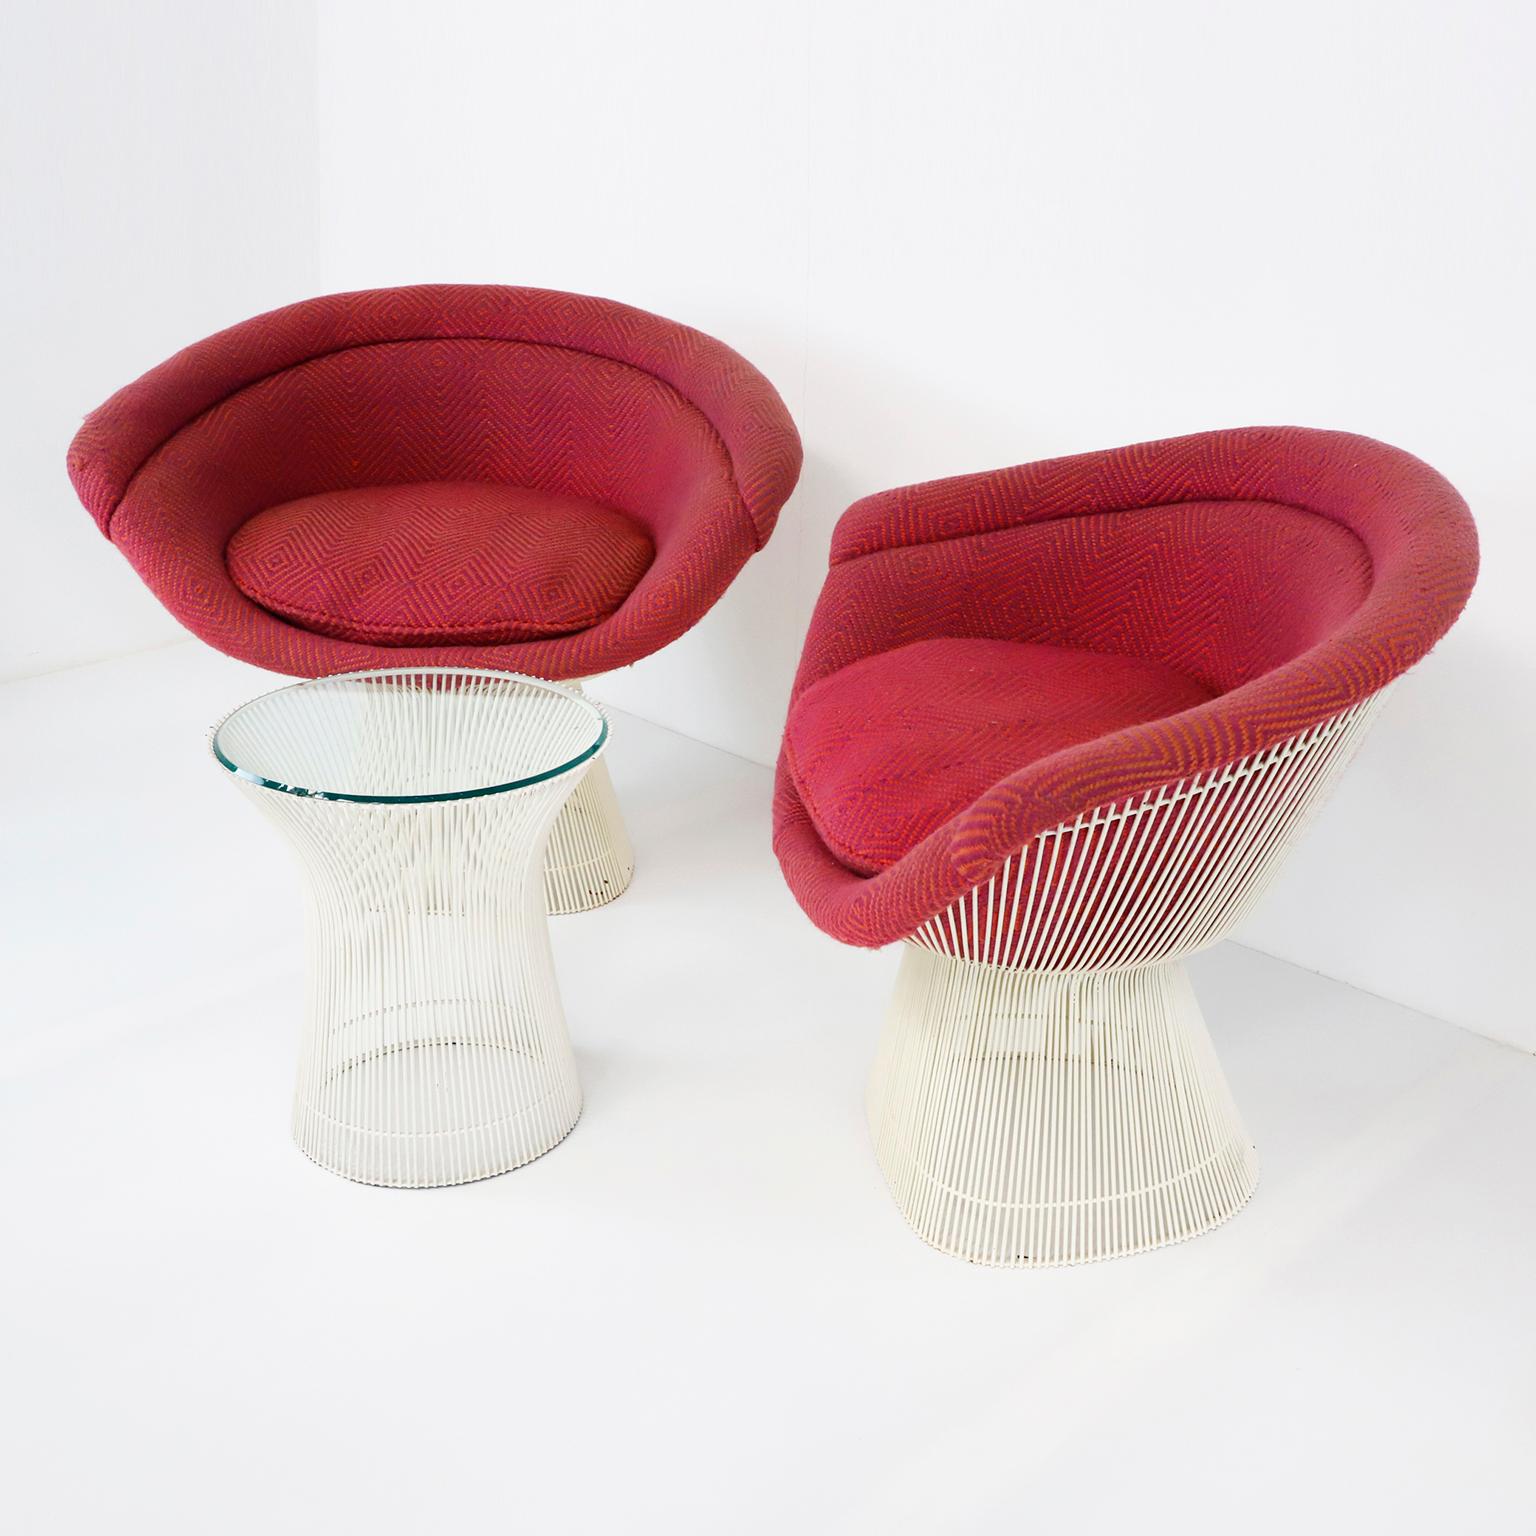 Special Edition of pair of lounge chairs and table designed by Warren Platner. These are very early production. A stunning set.